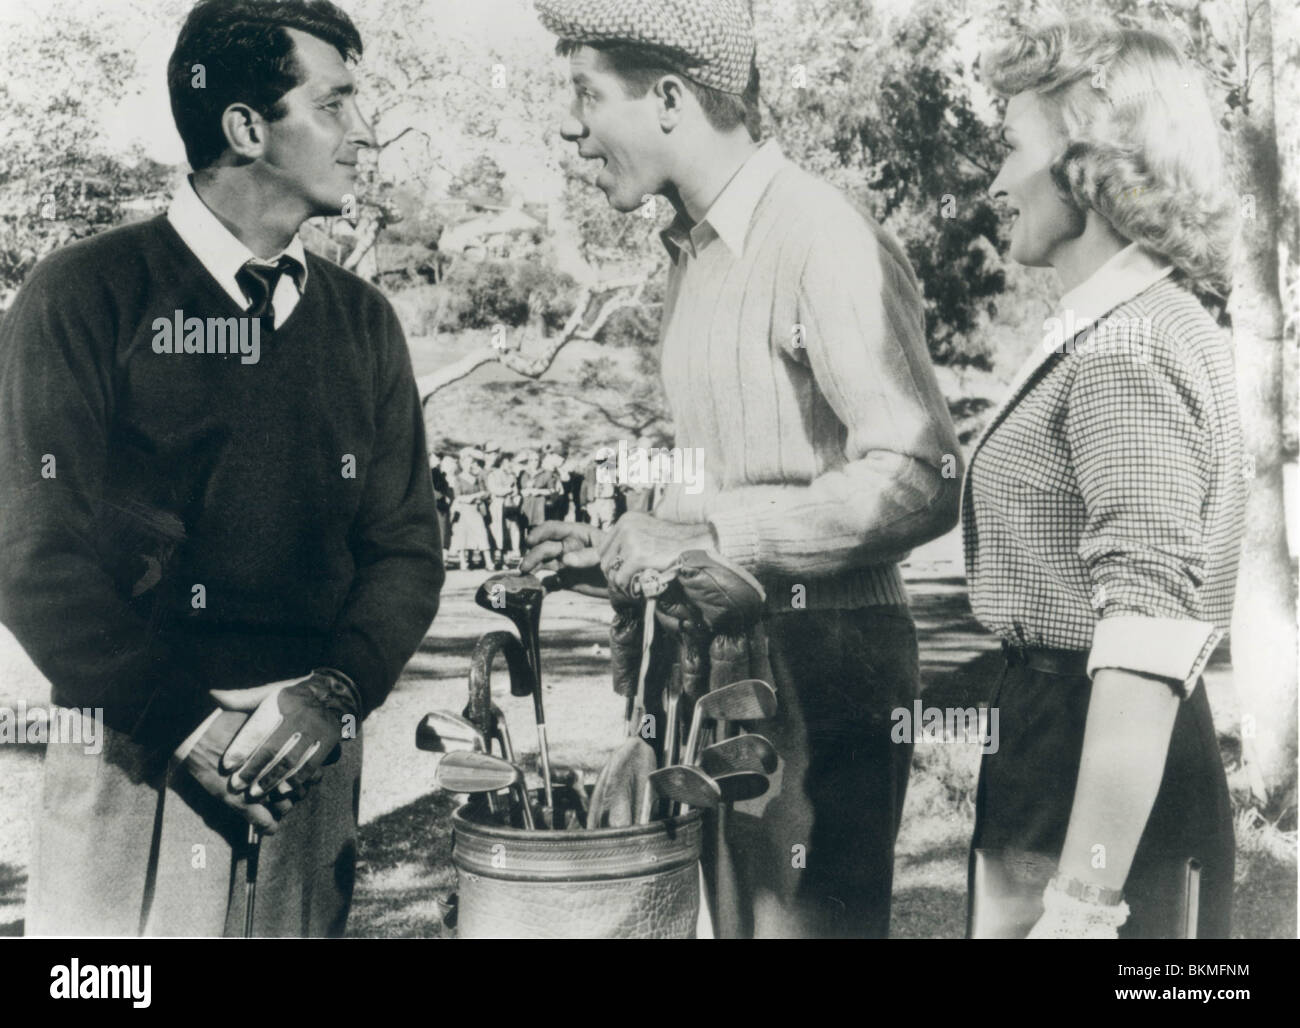 THE CADDY (1953) DEAN MARTIN, JERRY LEWIS, DONNA REED CADD 003P L Stock Photo